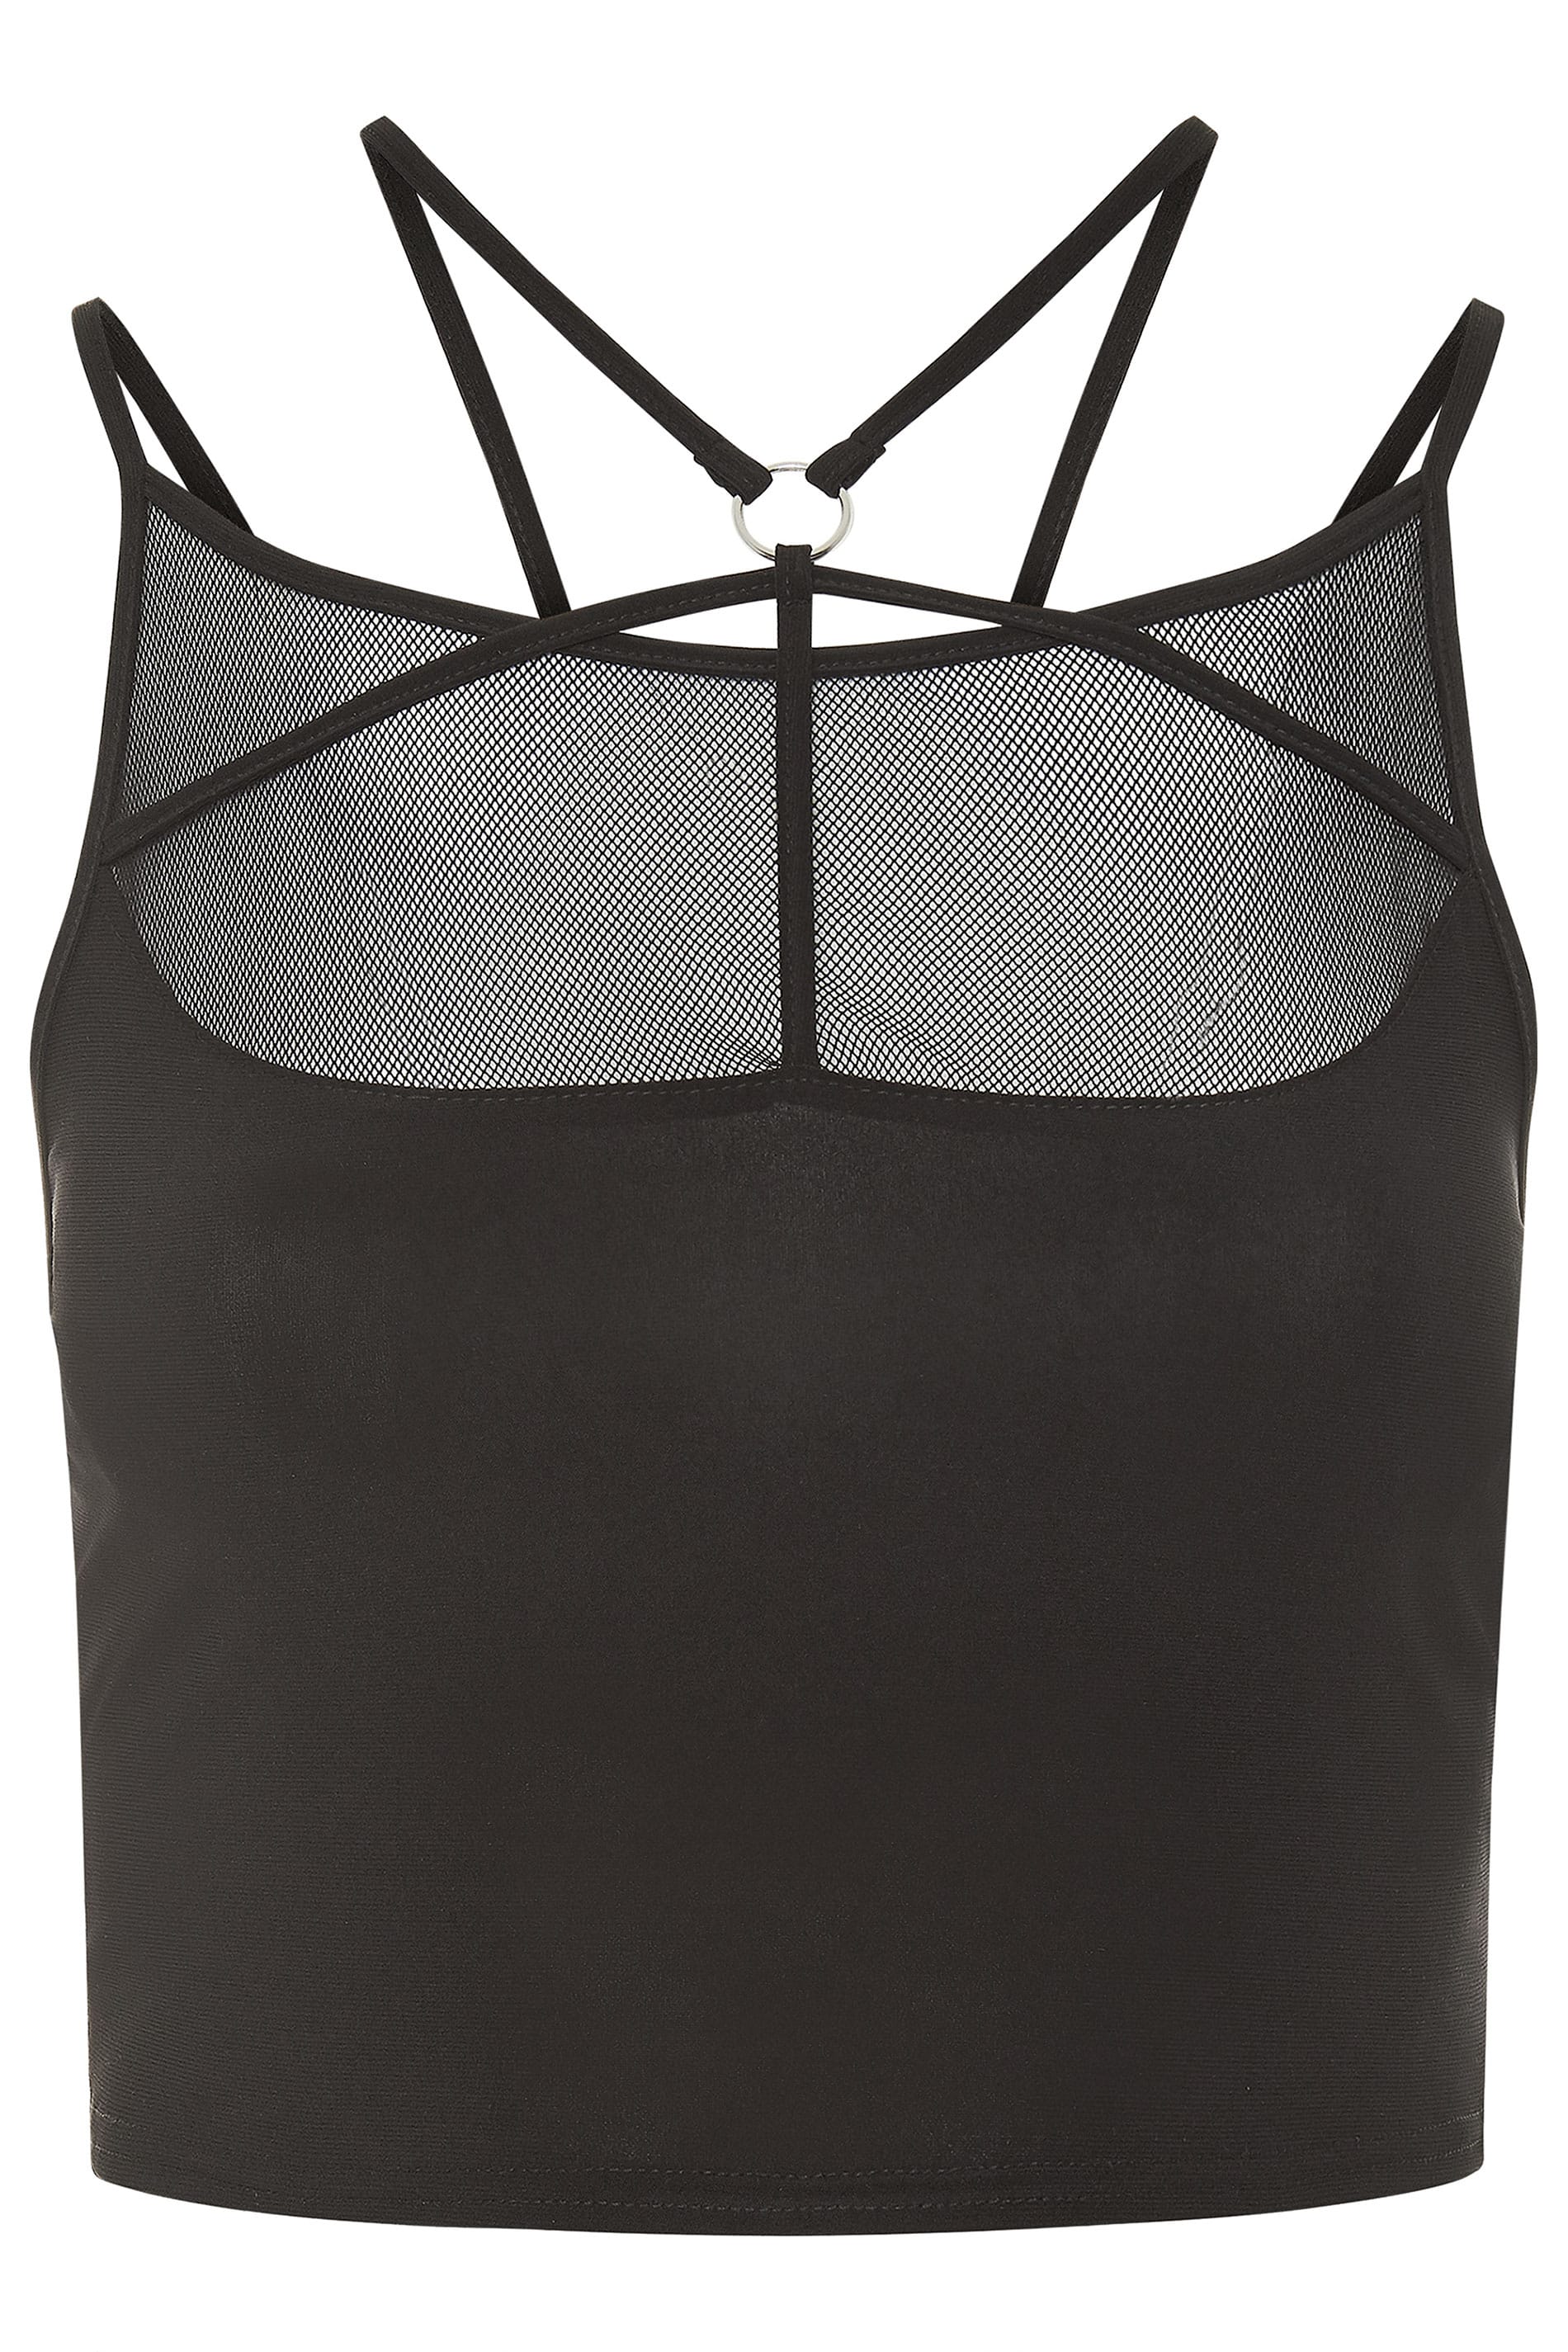 LIMITED COLLECTION Black Mesh Harness Bralette | Yours Clothing